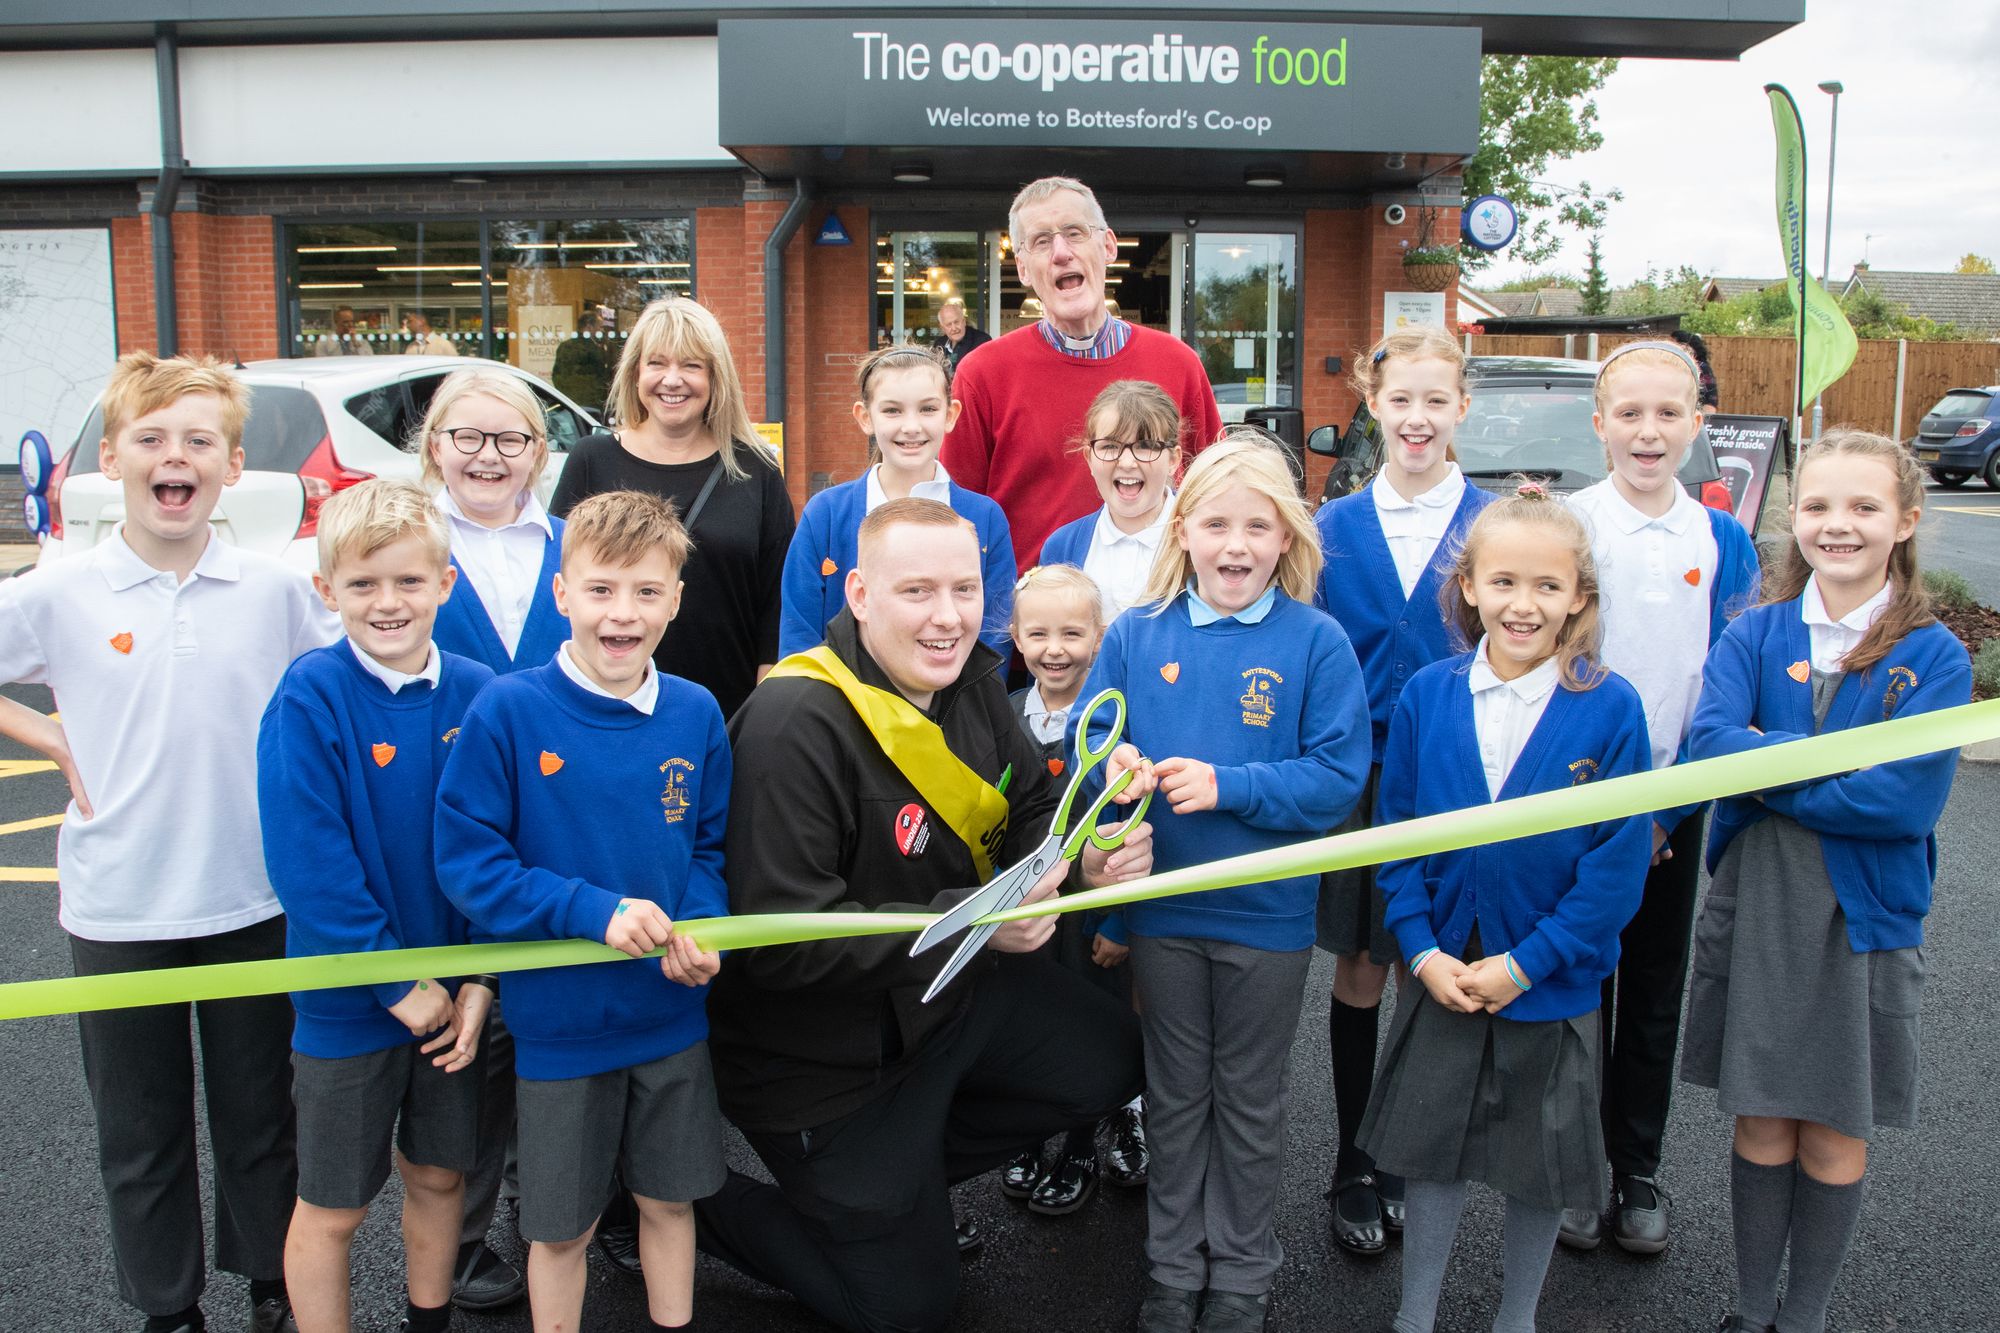 Food store team praise ‘fantastic community spirit’ during whirlwind first 12 months